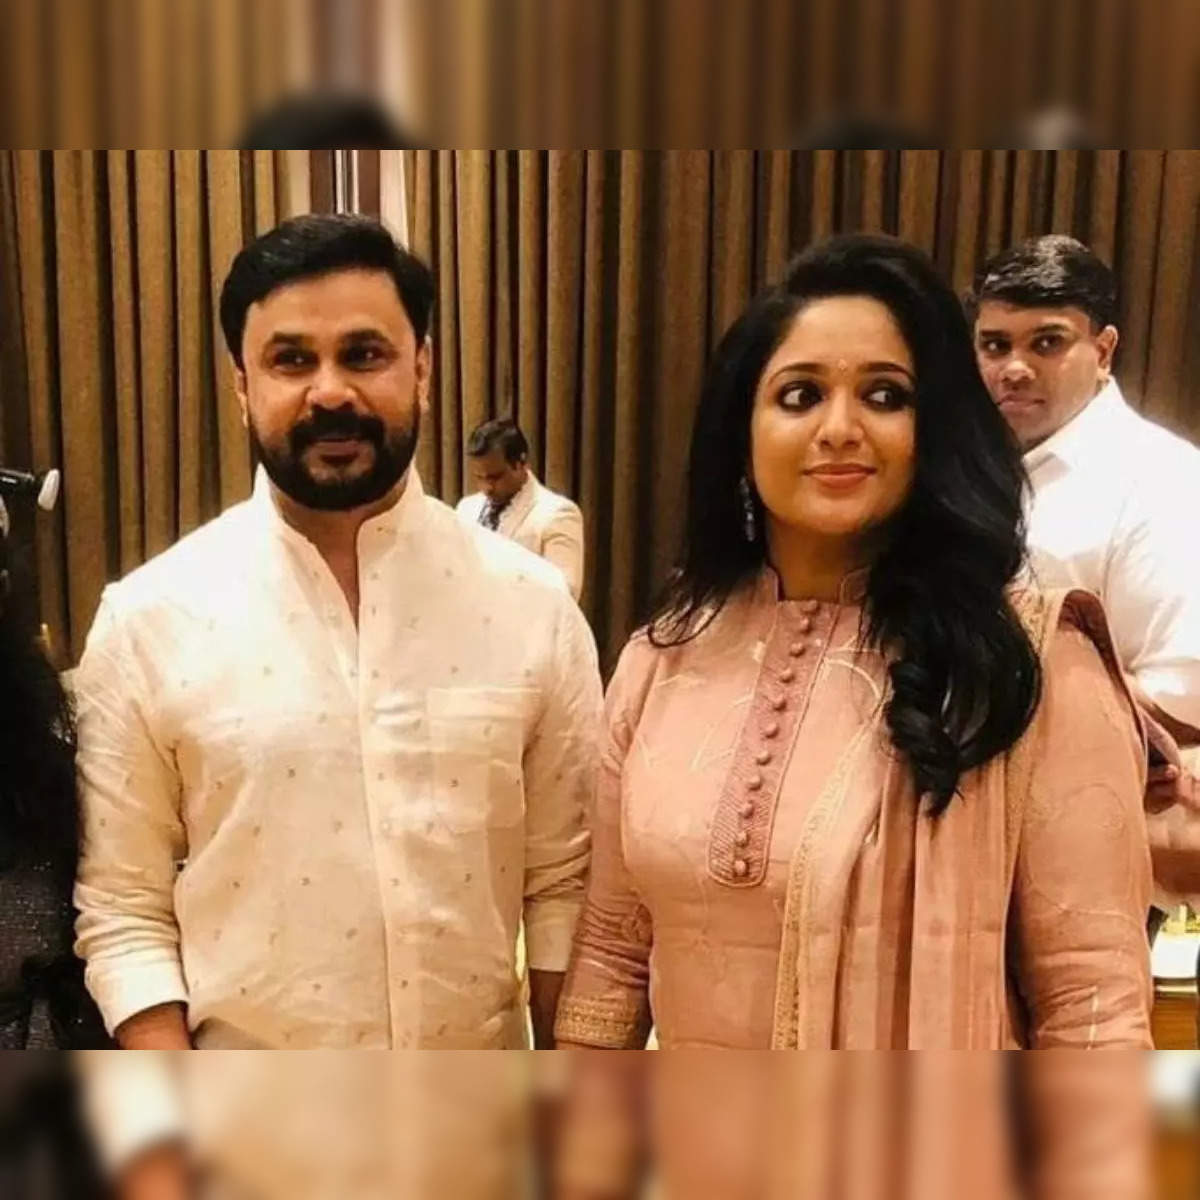 Kerala Whatsapp Leaked Videos - Kavya Madhavan: Kerala actress assault case: Actor Dileep's wife Kavya  Madhavan grilled by crime branch for five hours - The Economic Times